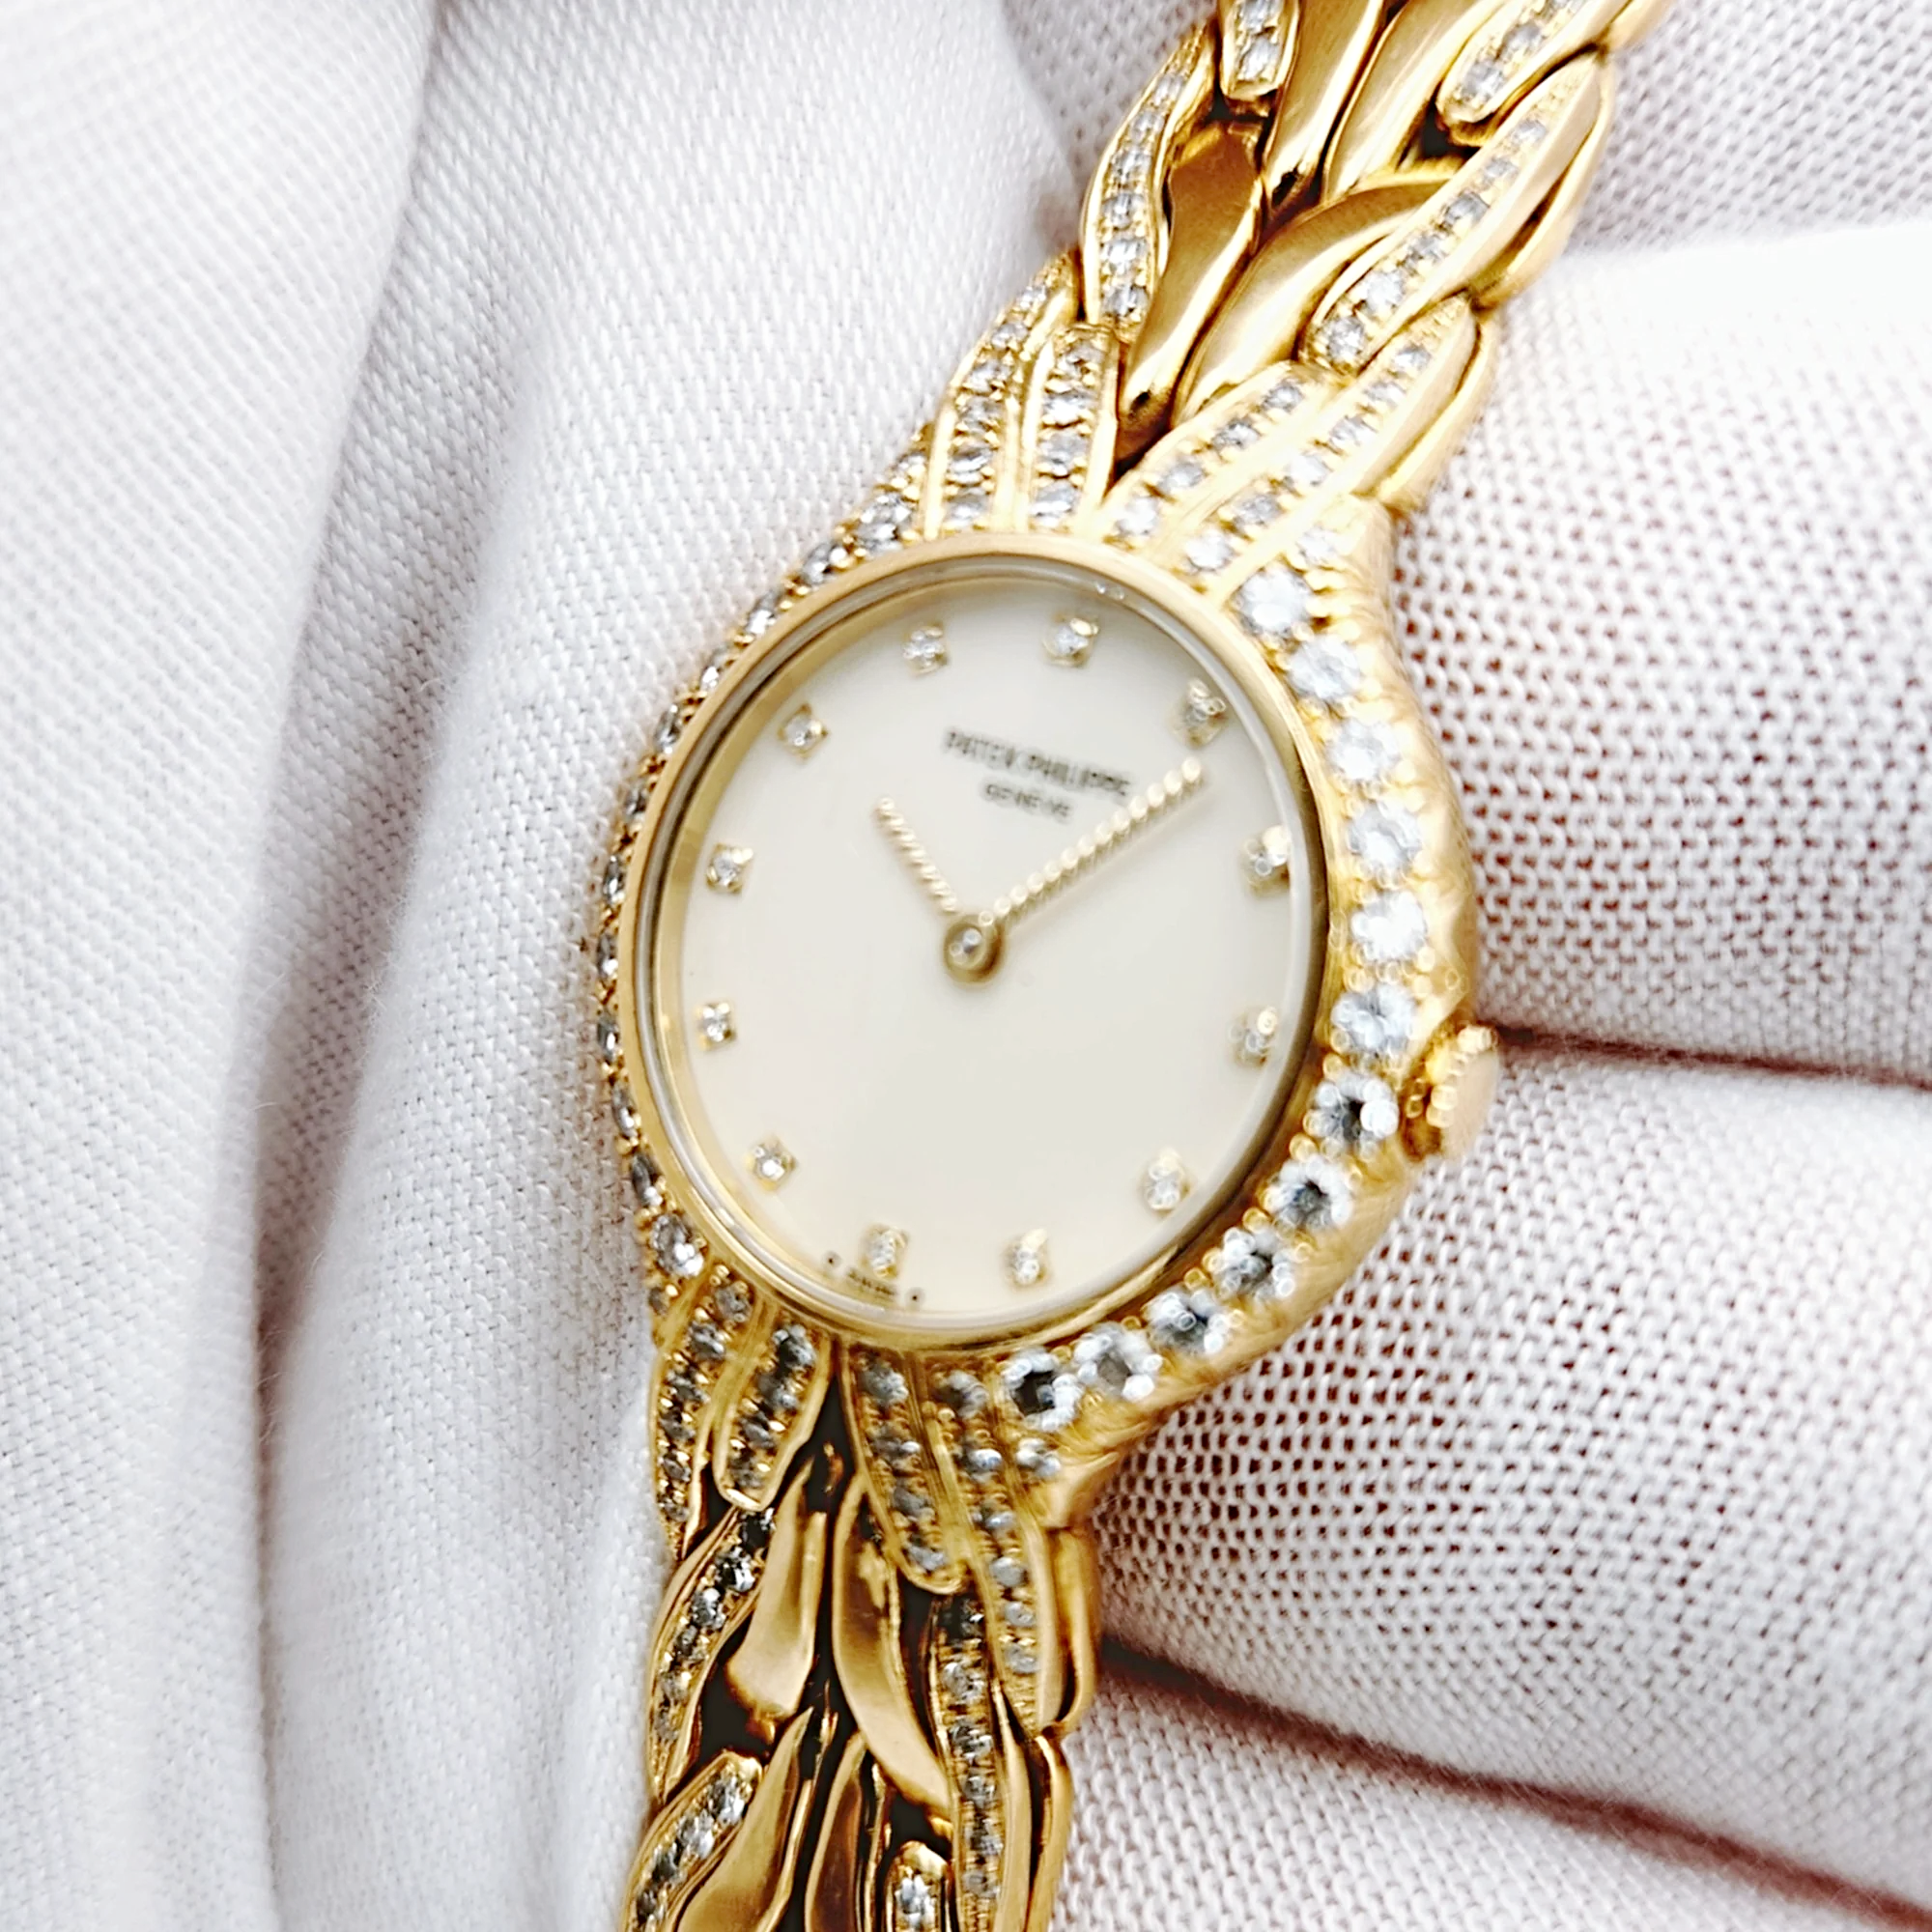 Ladies Patek Philippe 23mm La Flamme 18K Yellow Gold Watch with Cream Diamond Dial and Diamond Bezel. (Pre-Owned Model 4816/3)